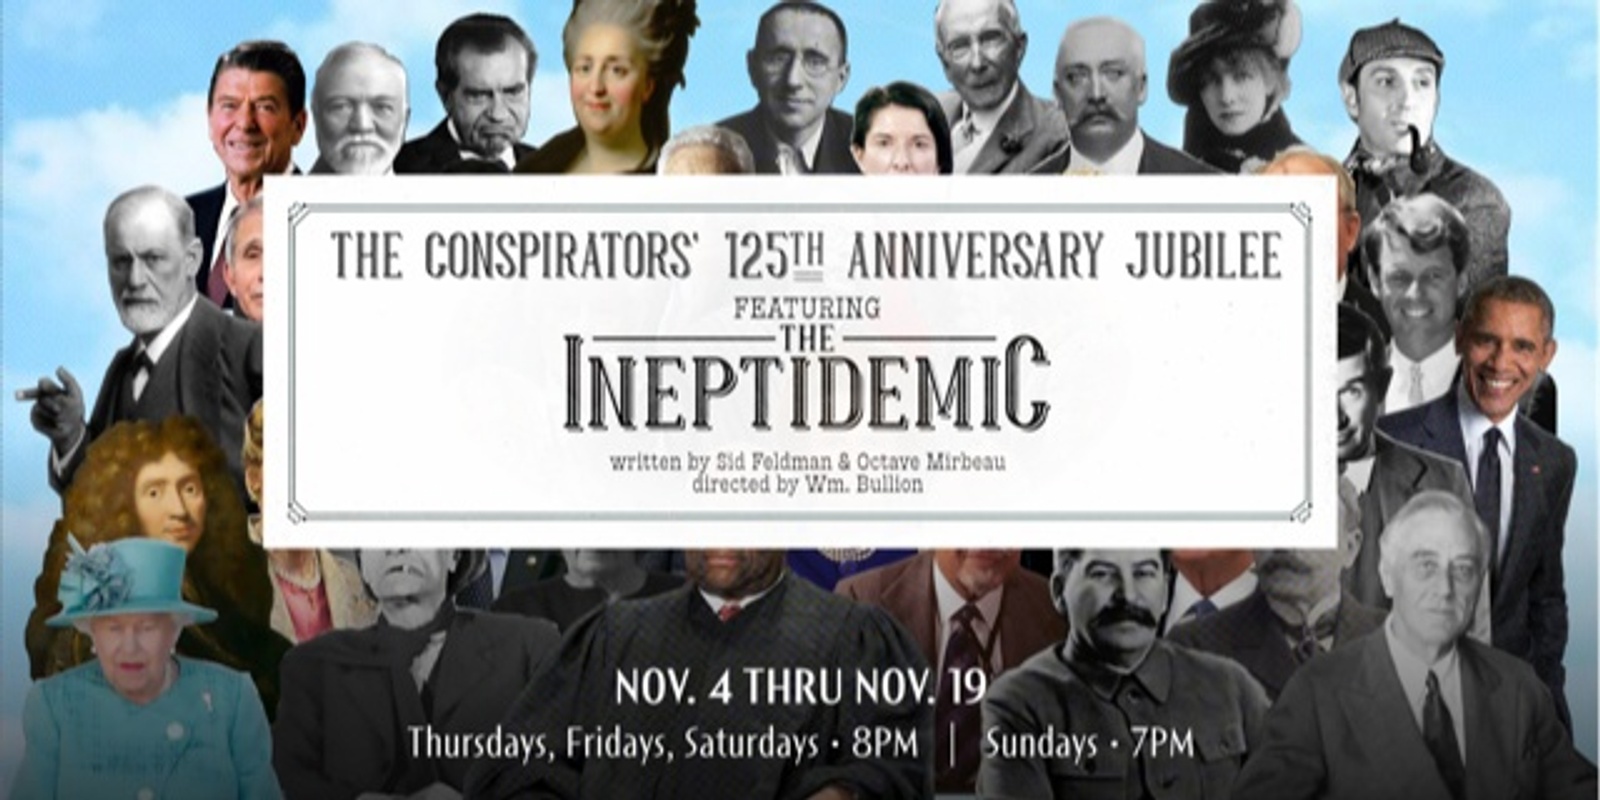 The Conspirators' 125th Anniversary Jubilee, Feat. "The Ineptidemic"